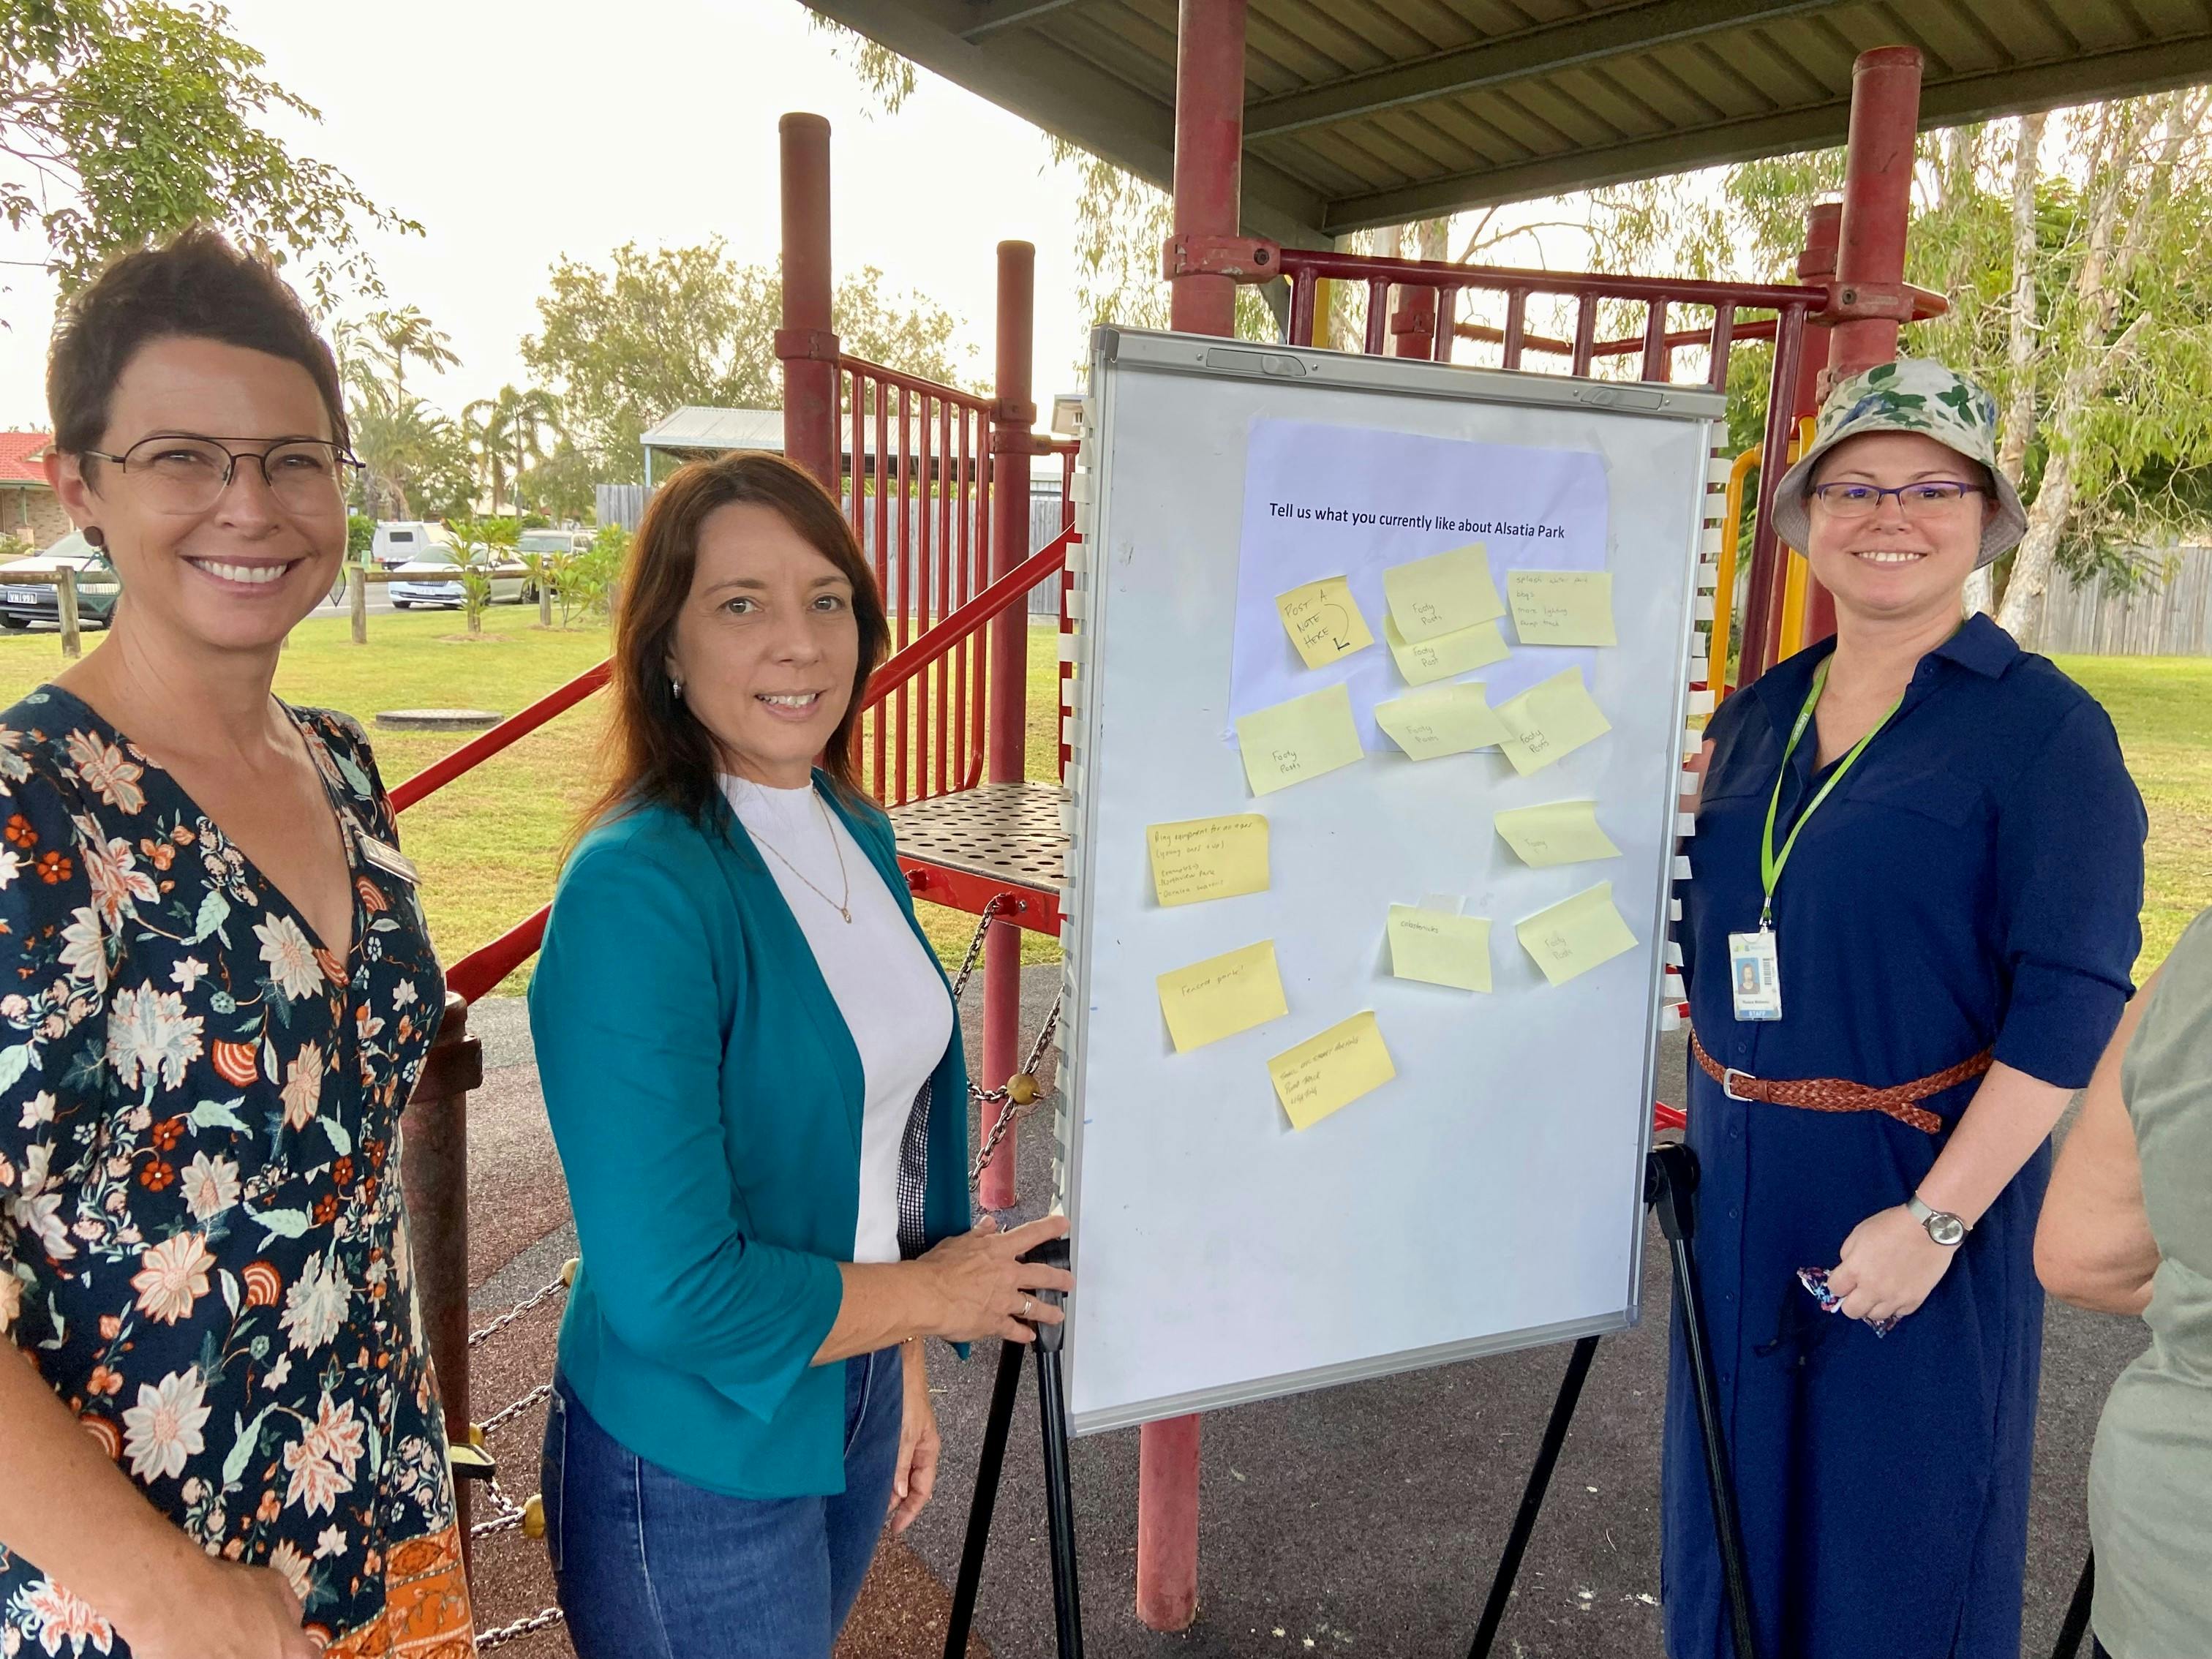 Councillors Michelle Green and Belinda Hasson look of the ideas wall and talk to council's Senior Parks Planner Ruzica Mohoko.